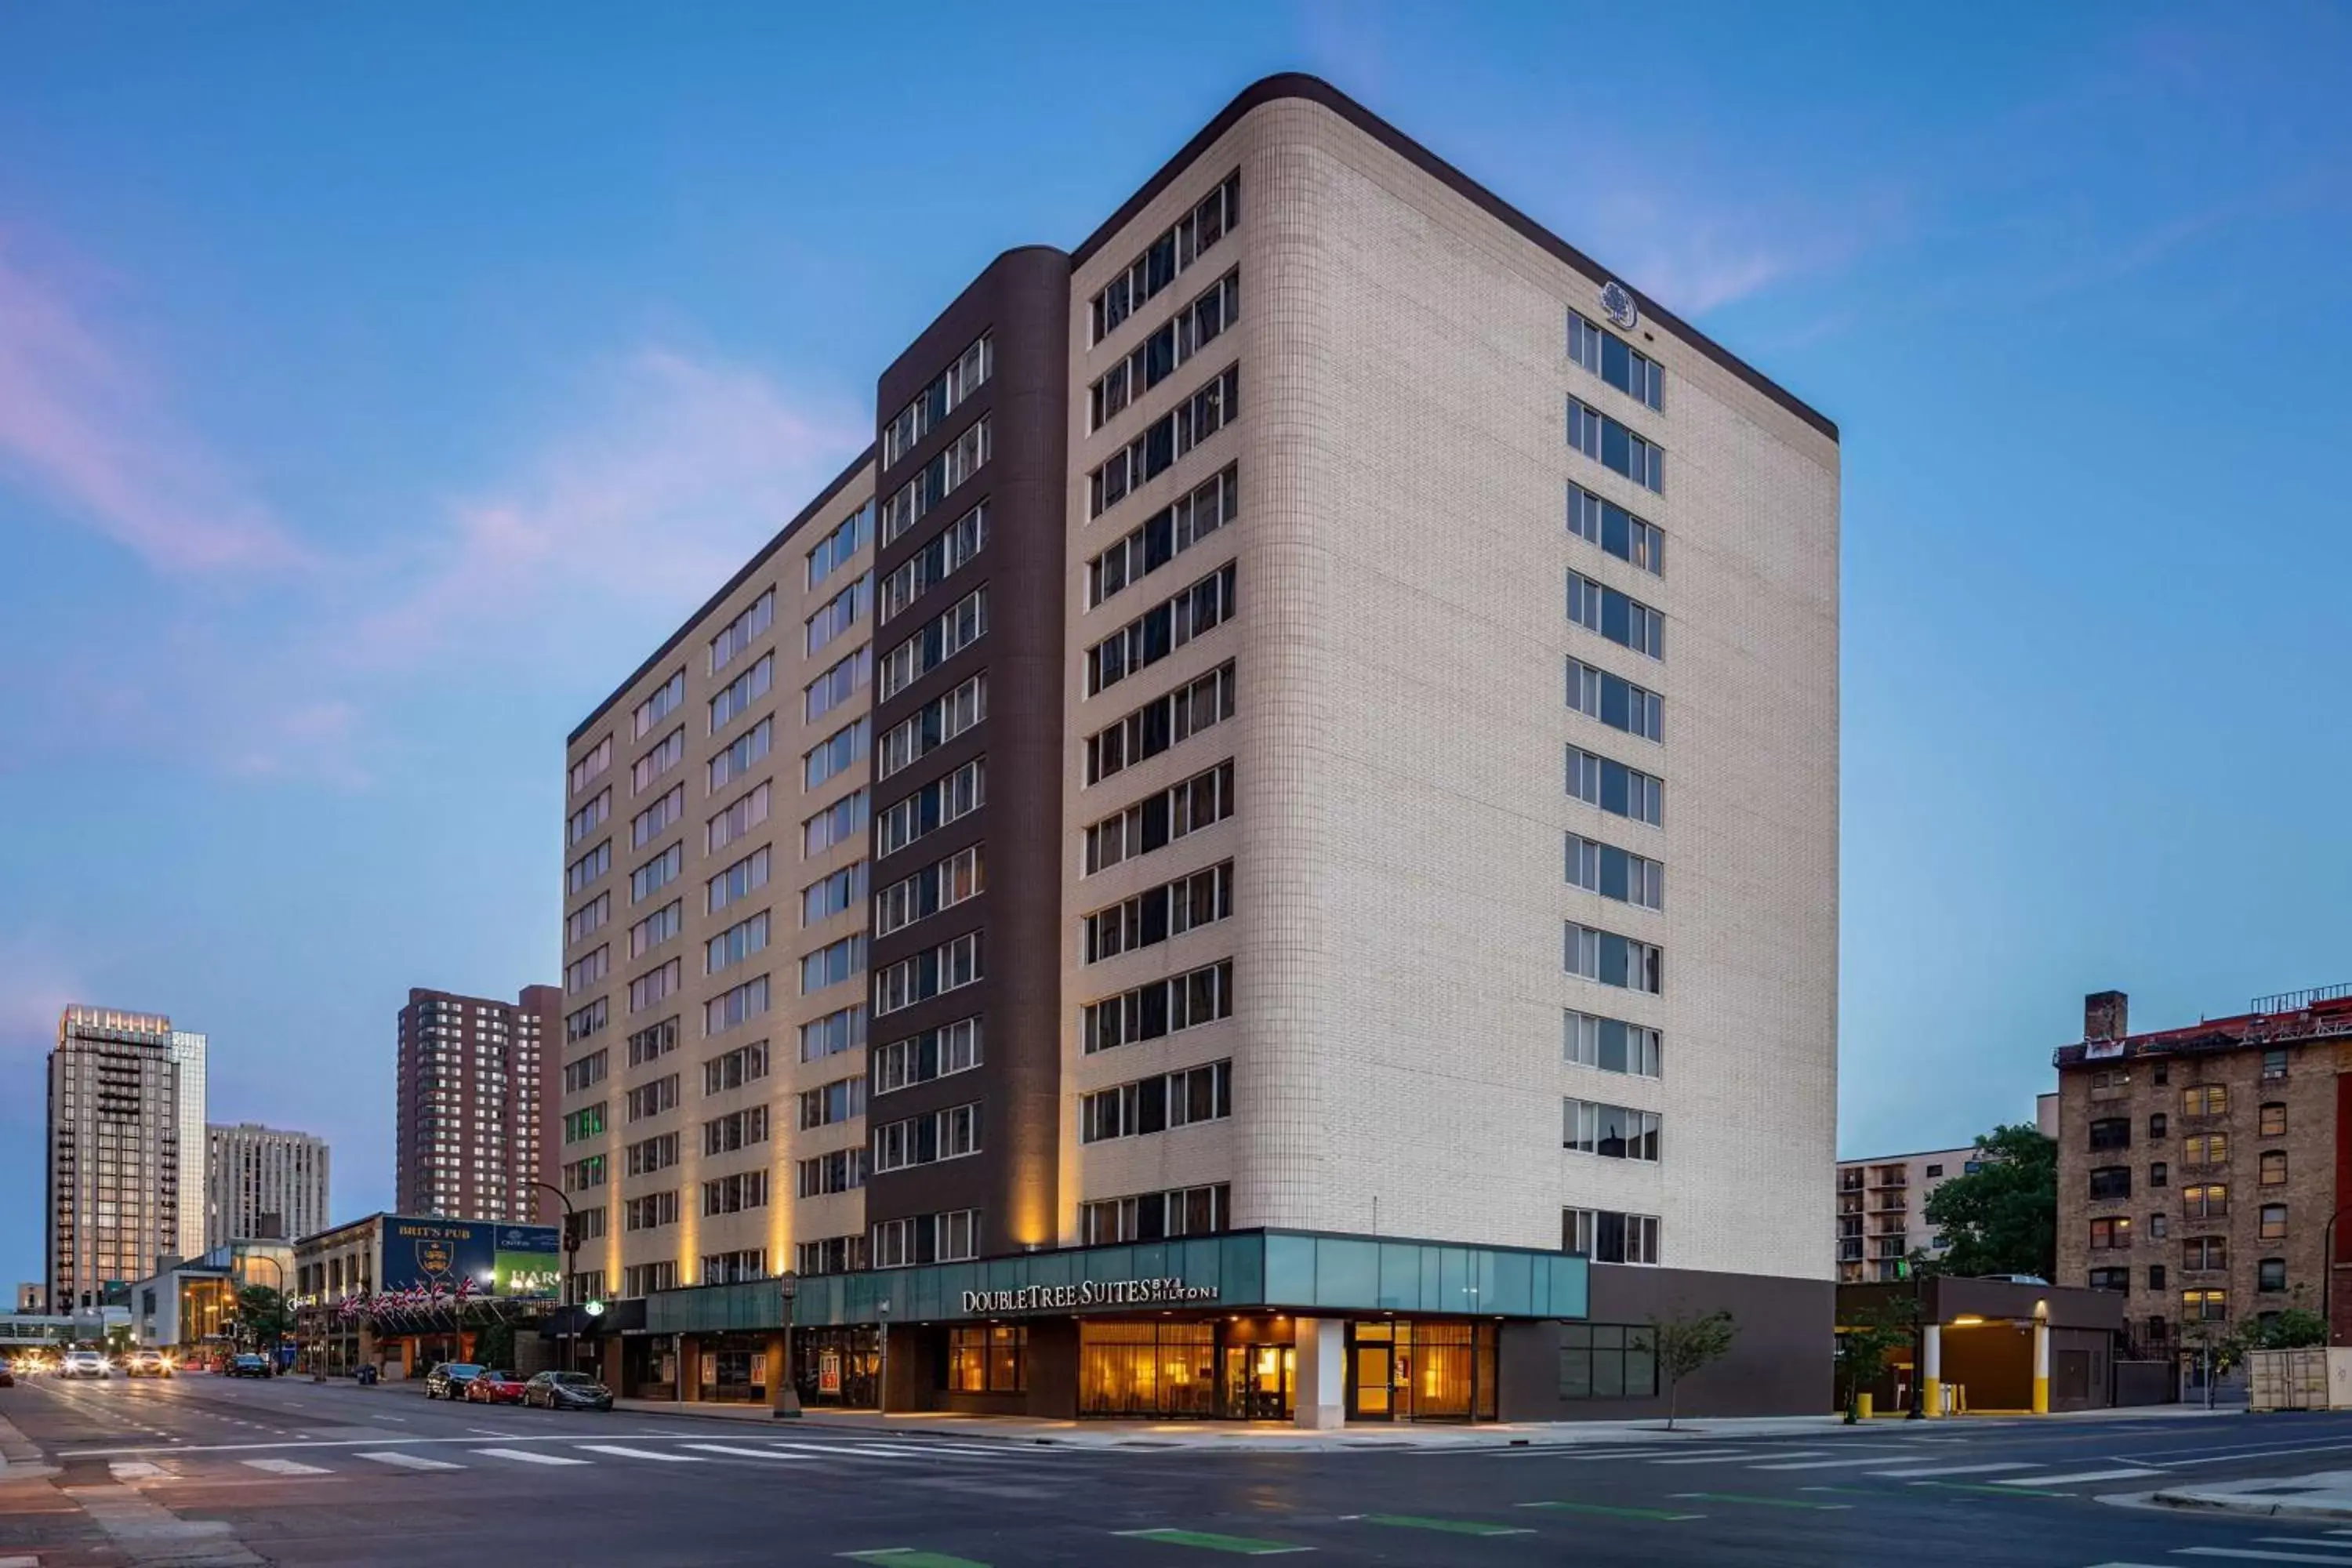 Property Building in DoubleTree Suites by Hilton Minneapolis Downtown